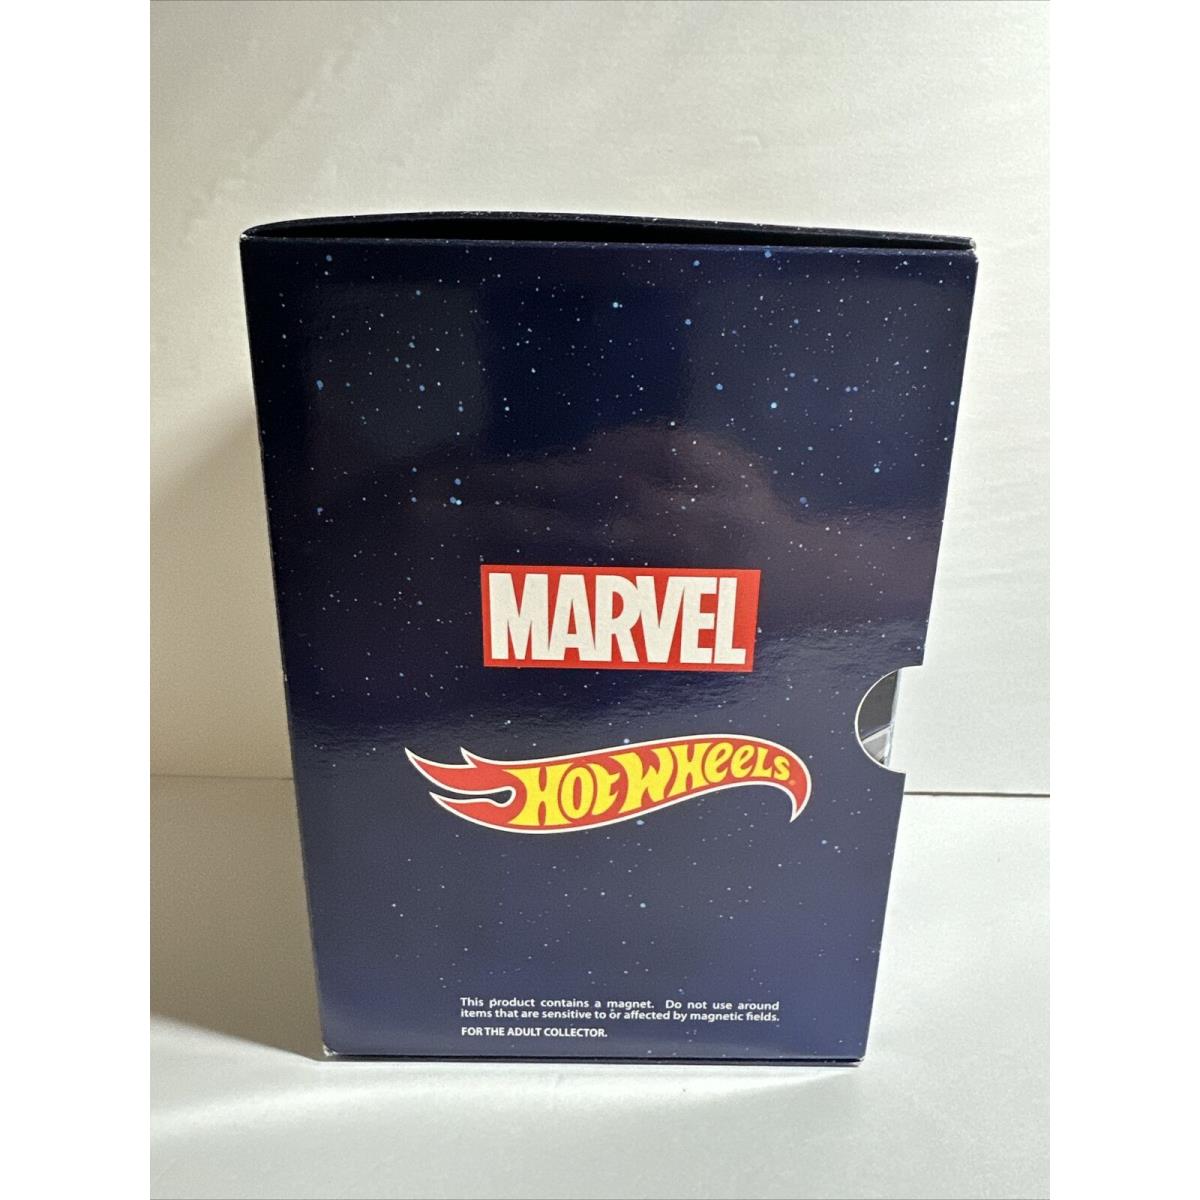 2015 Hot Wheels Sdcc Secret Wars 3 Pack Captain America Ironman and Spider-man